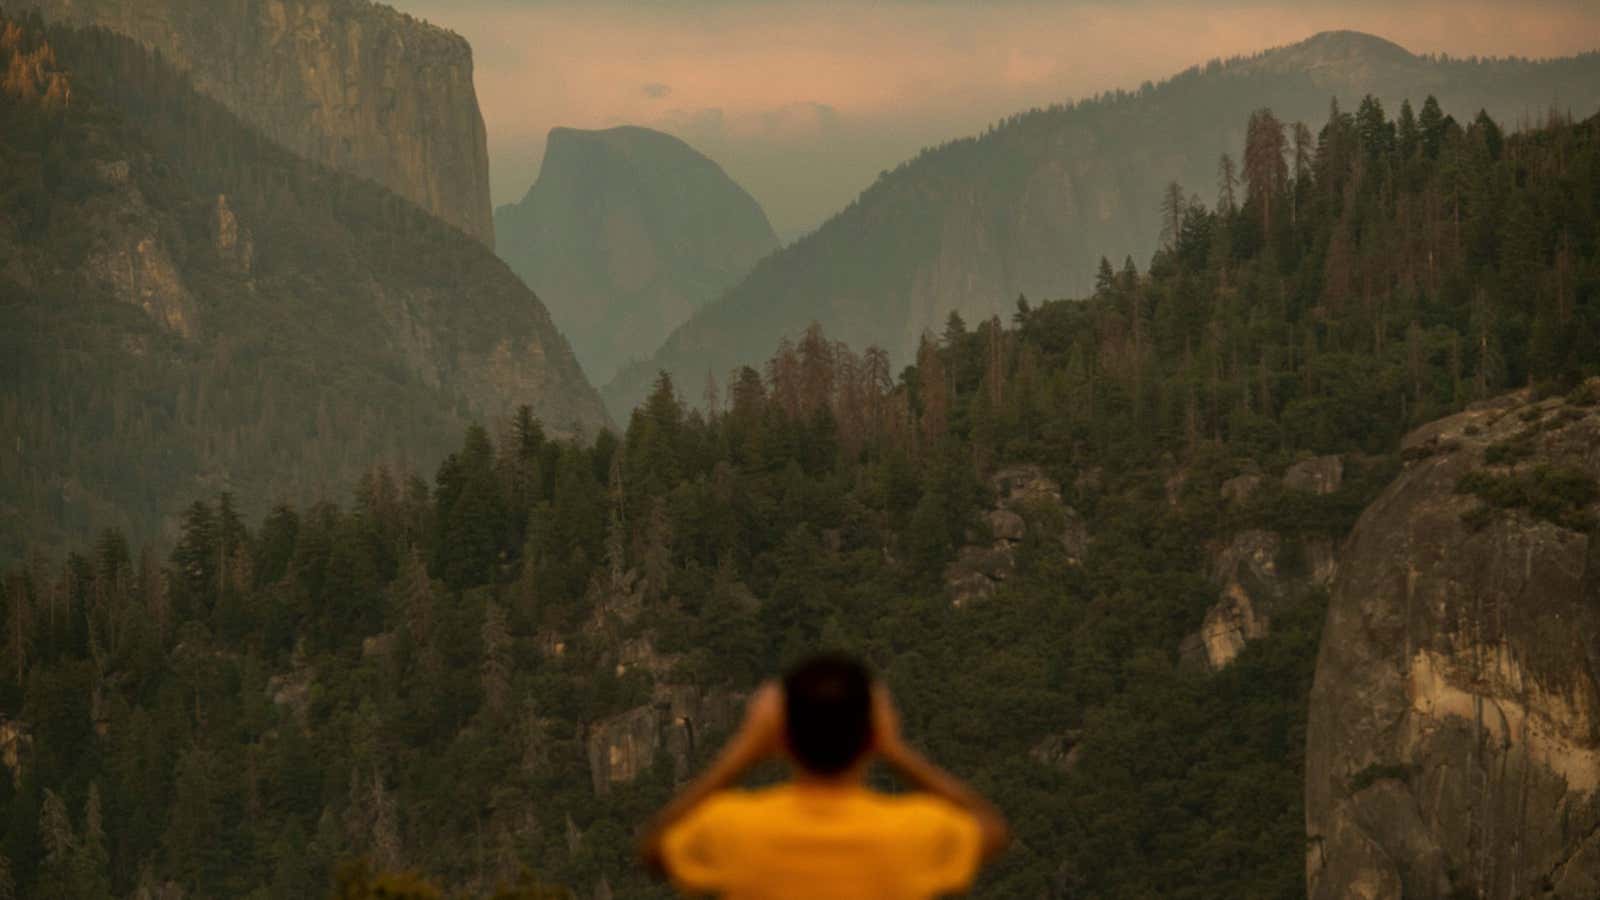 This summer’s hot, dry weather led to wildfires near Yosemite National Park, shutting the park down for days.